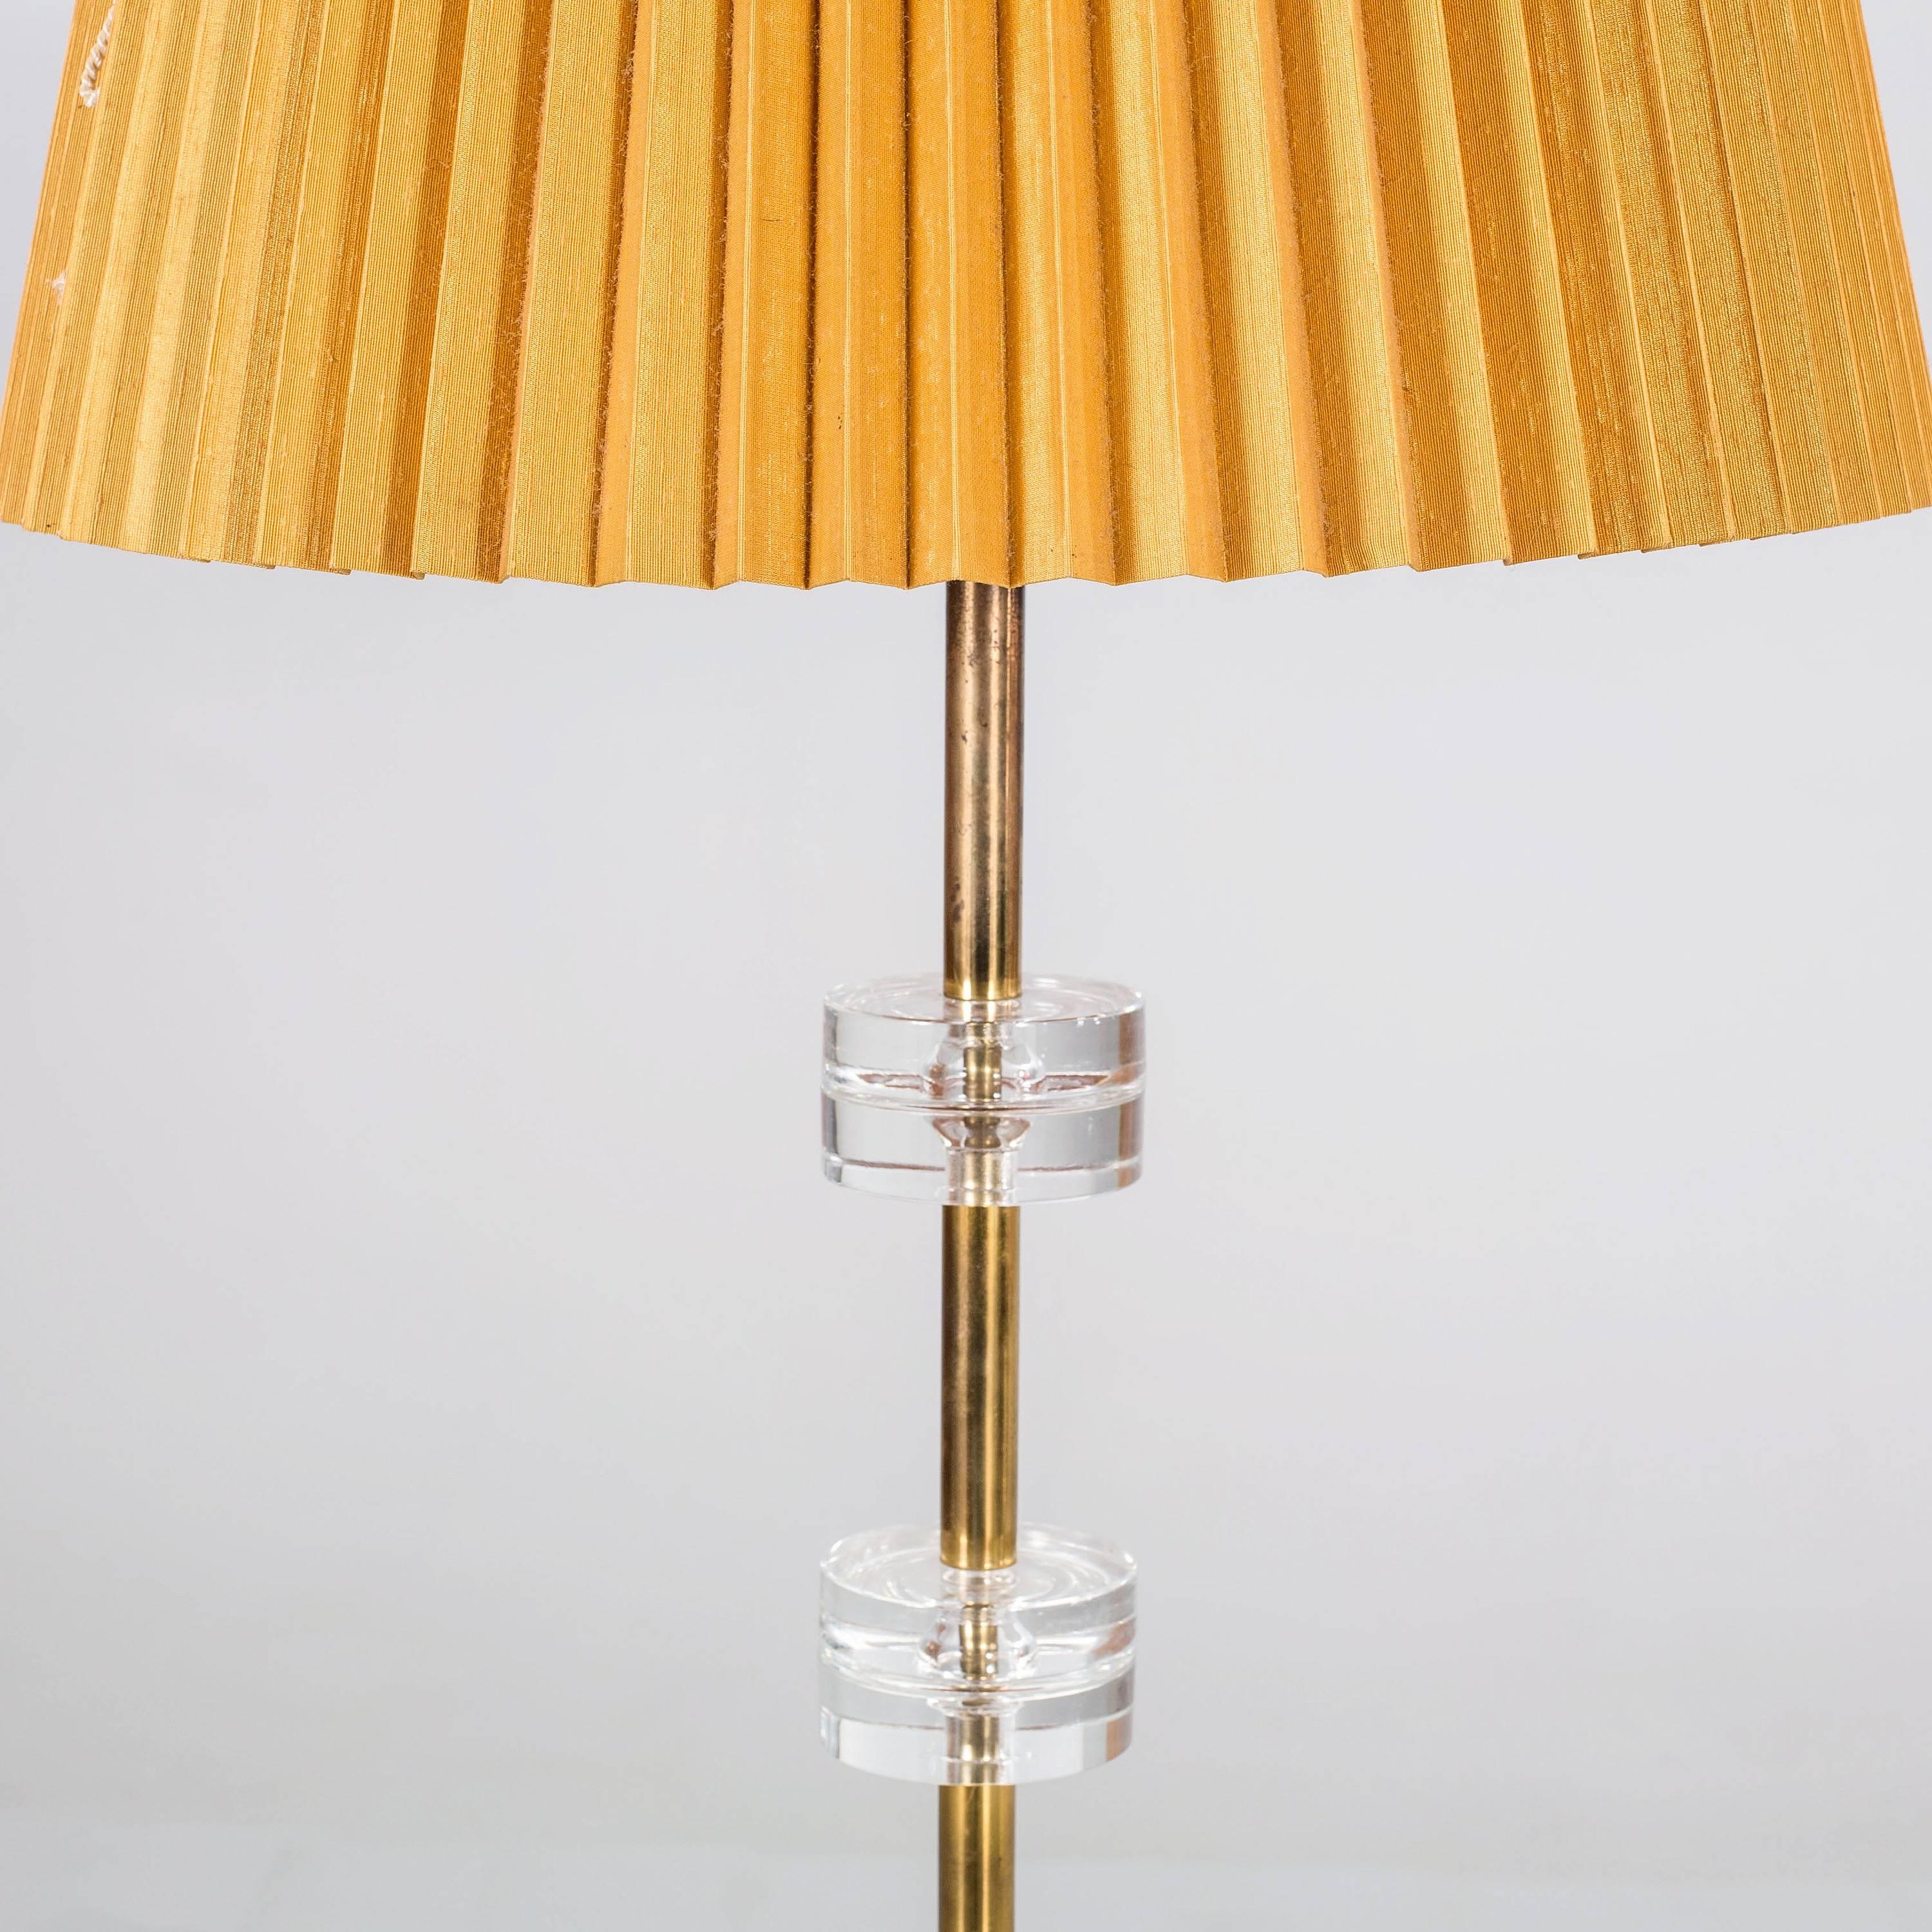 Pair of floor lamps designed by Carl Fagerlund for Orrefors, Sweden, circa 1970. Model RD 1990. Existing wiring, rewiring available upon request. The shades not included.
              